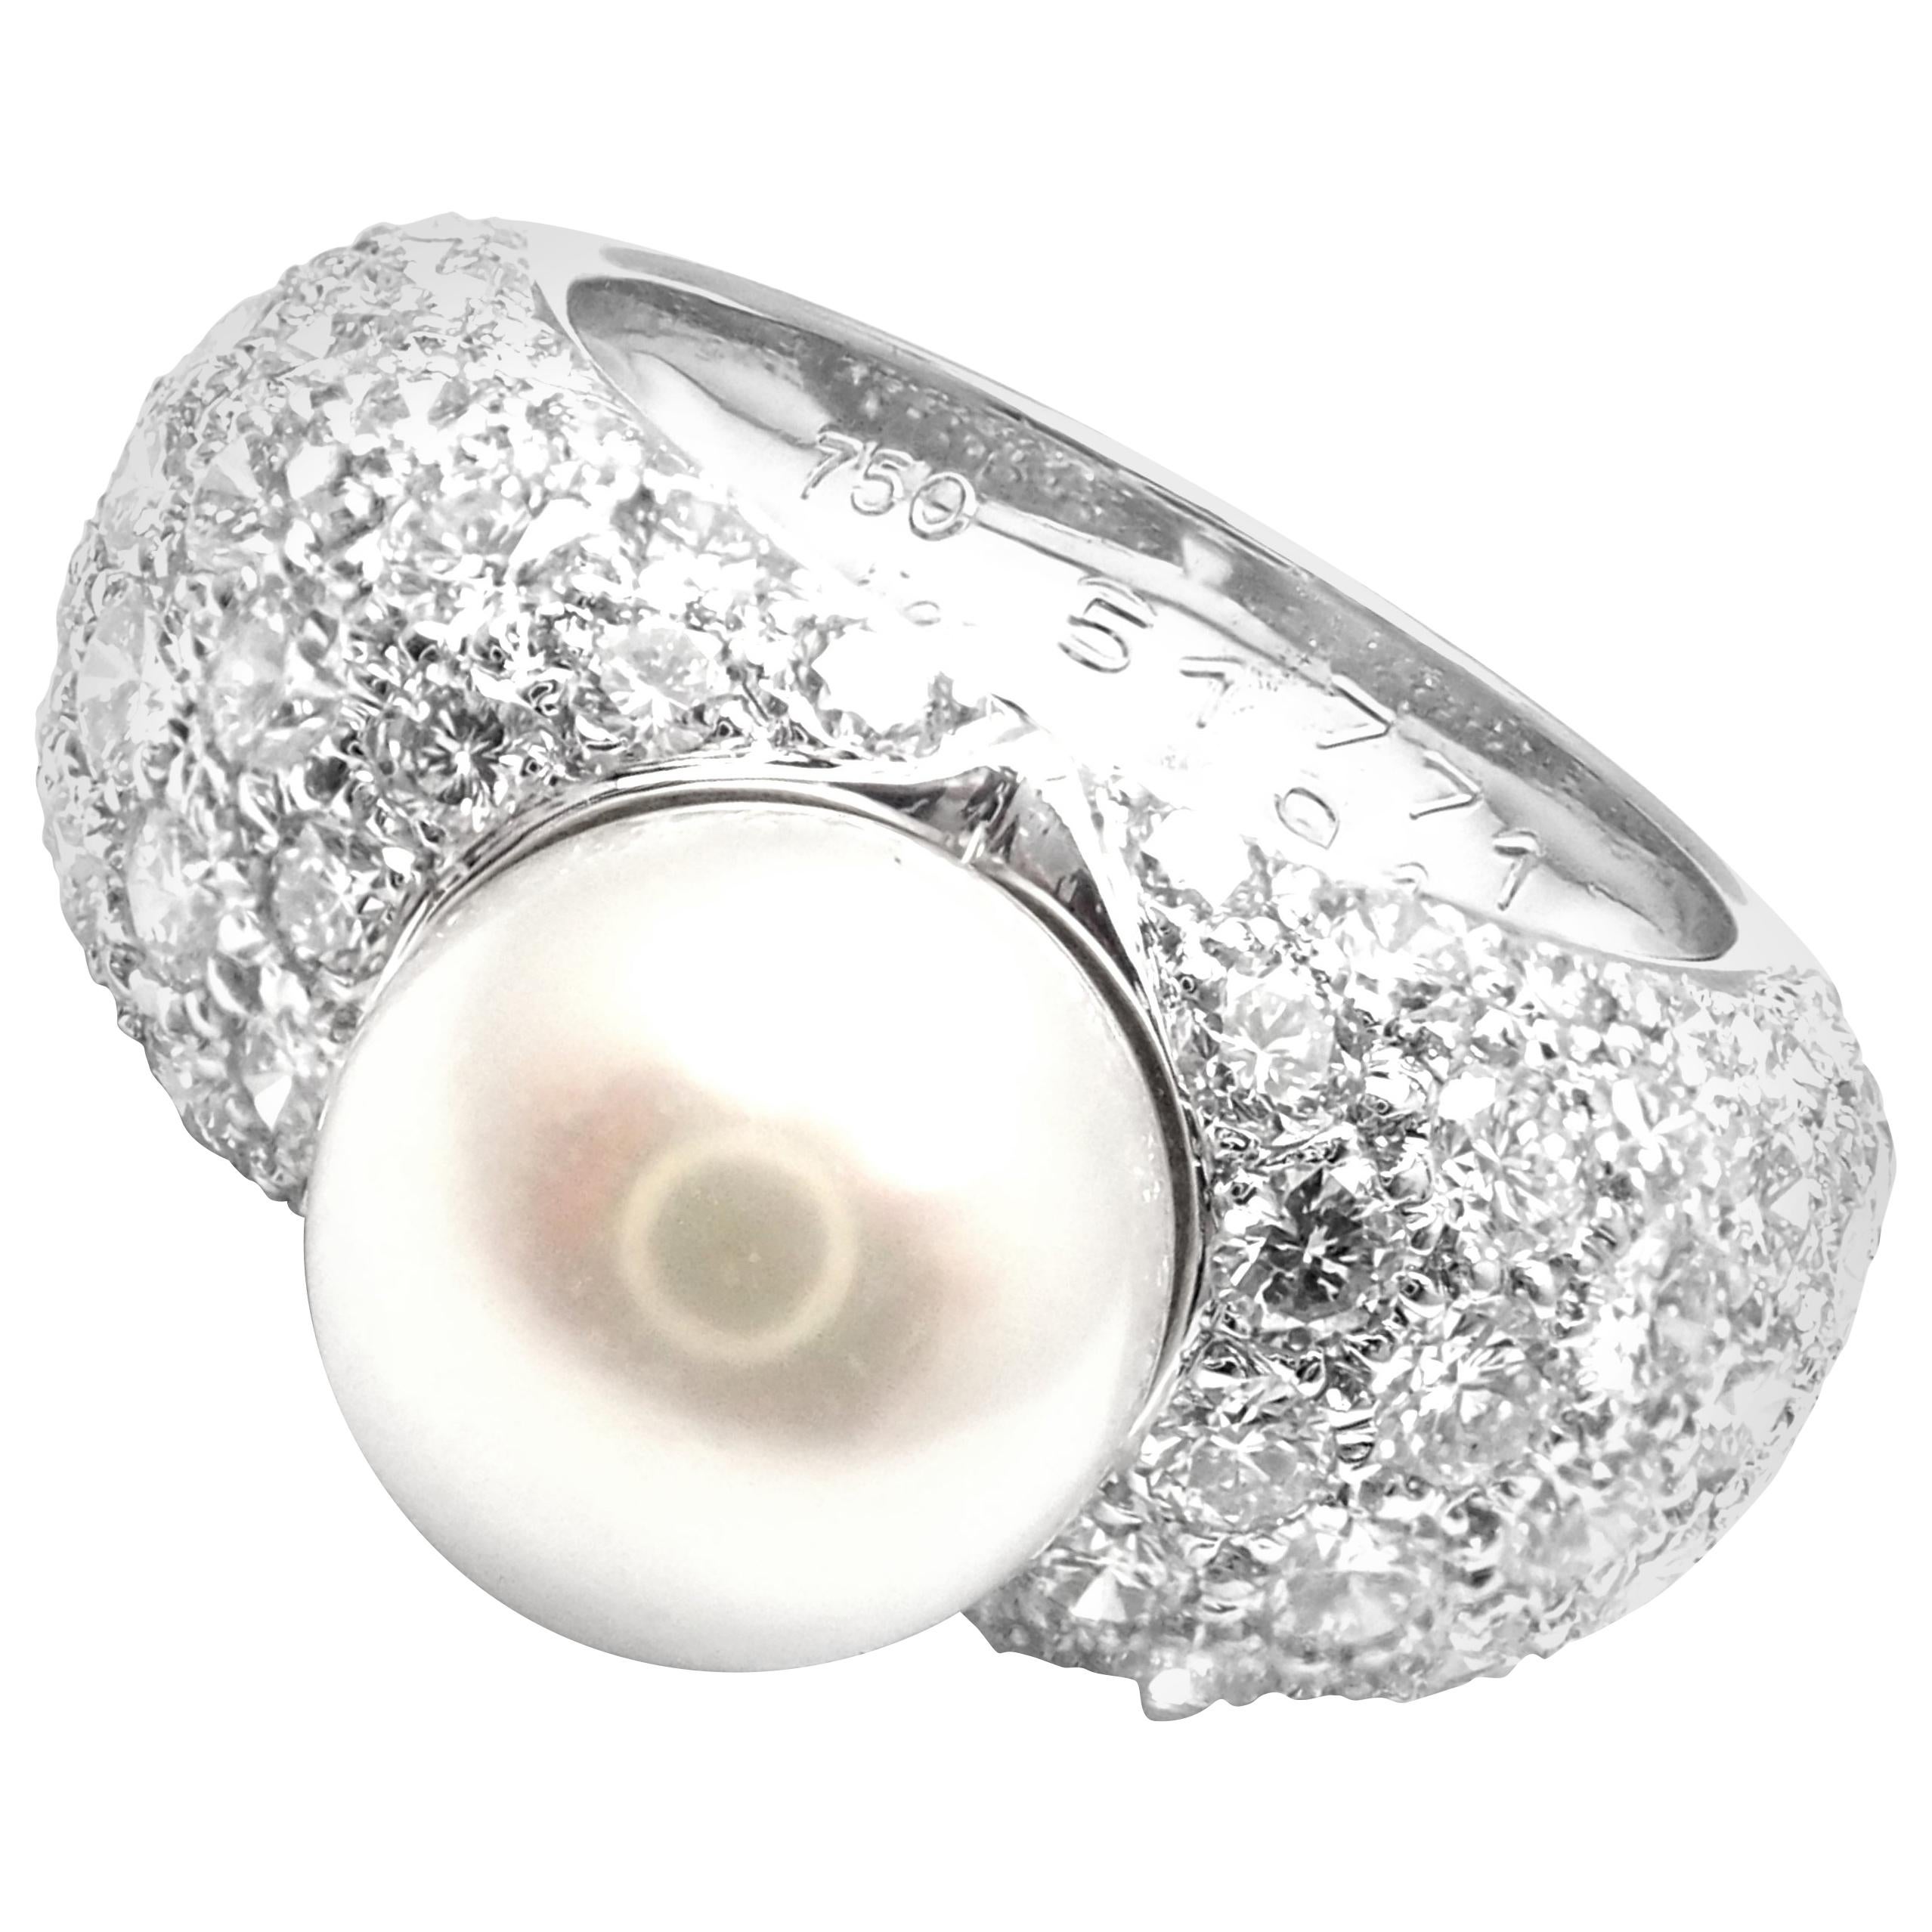 Cartier Pearl Ring - 15 For Sale on 1stDibs